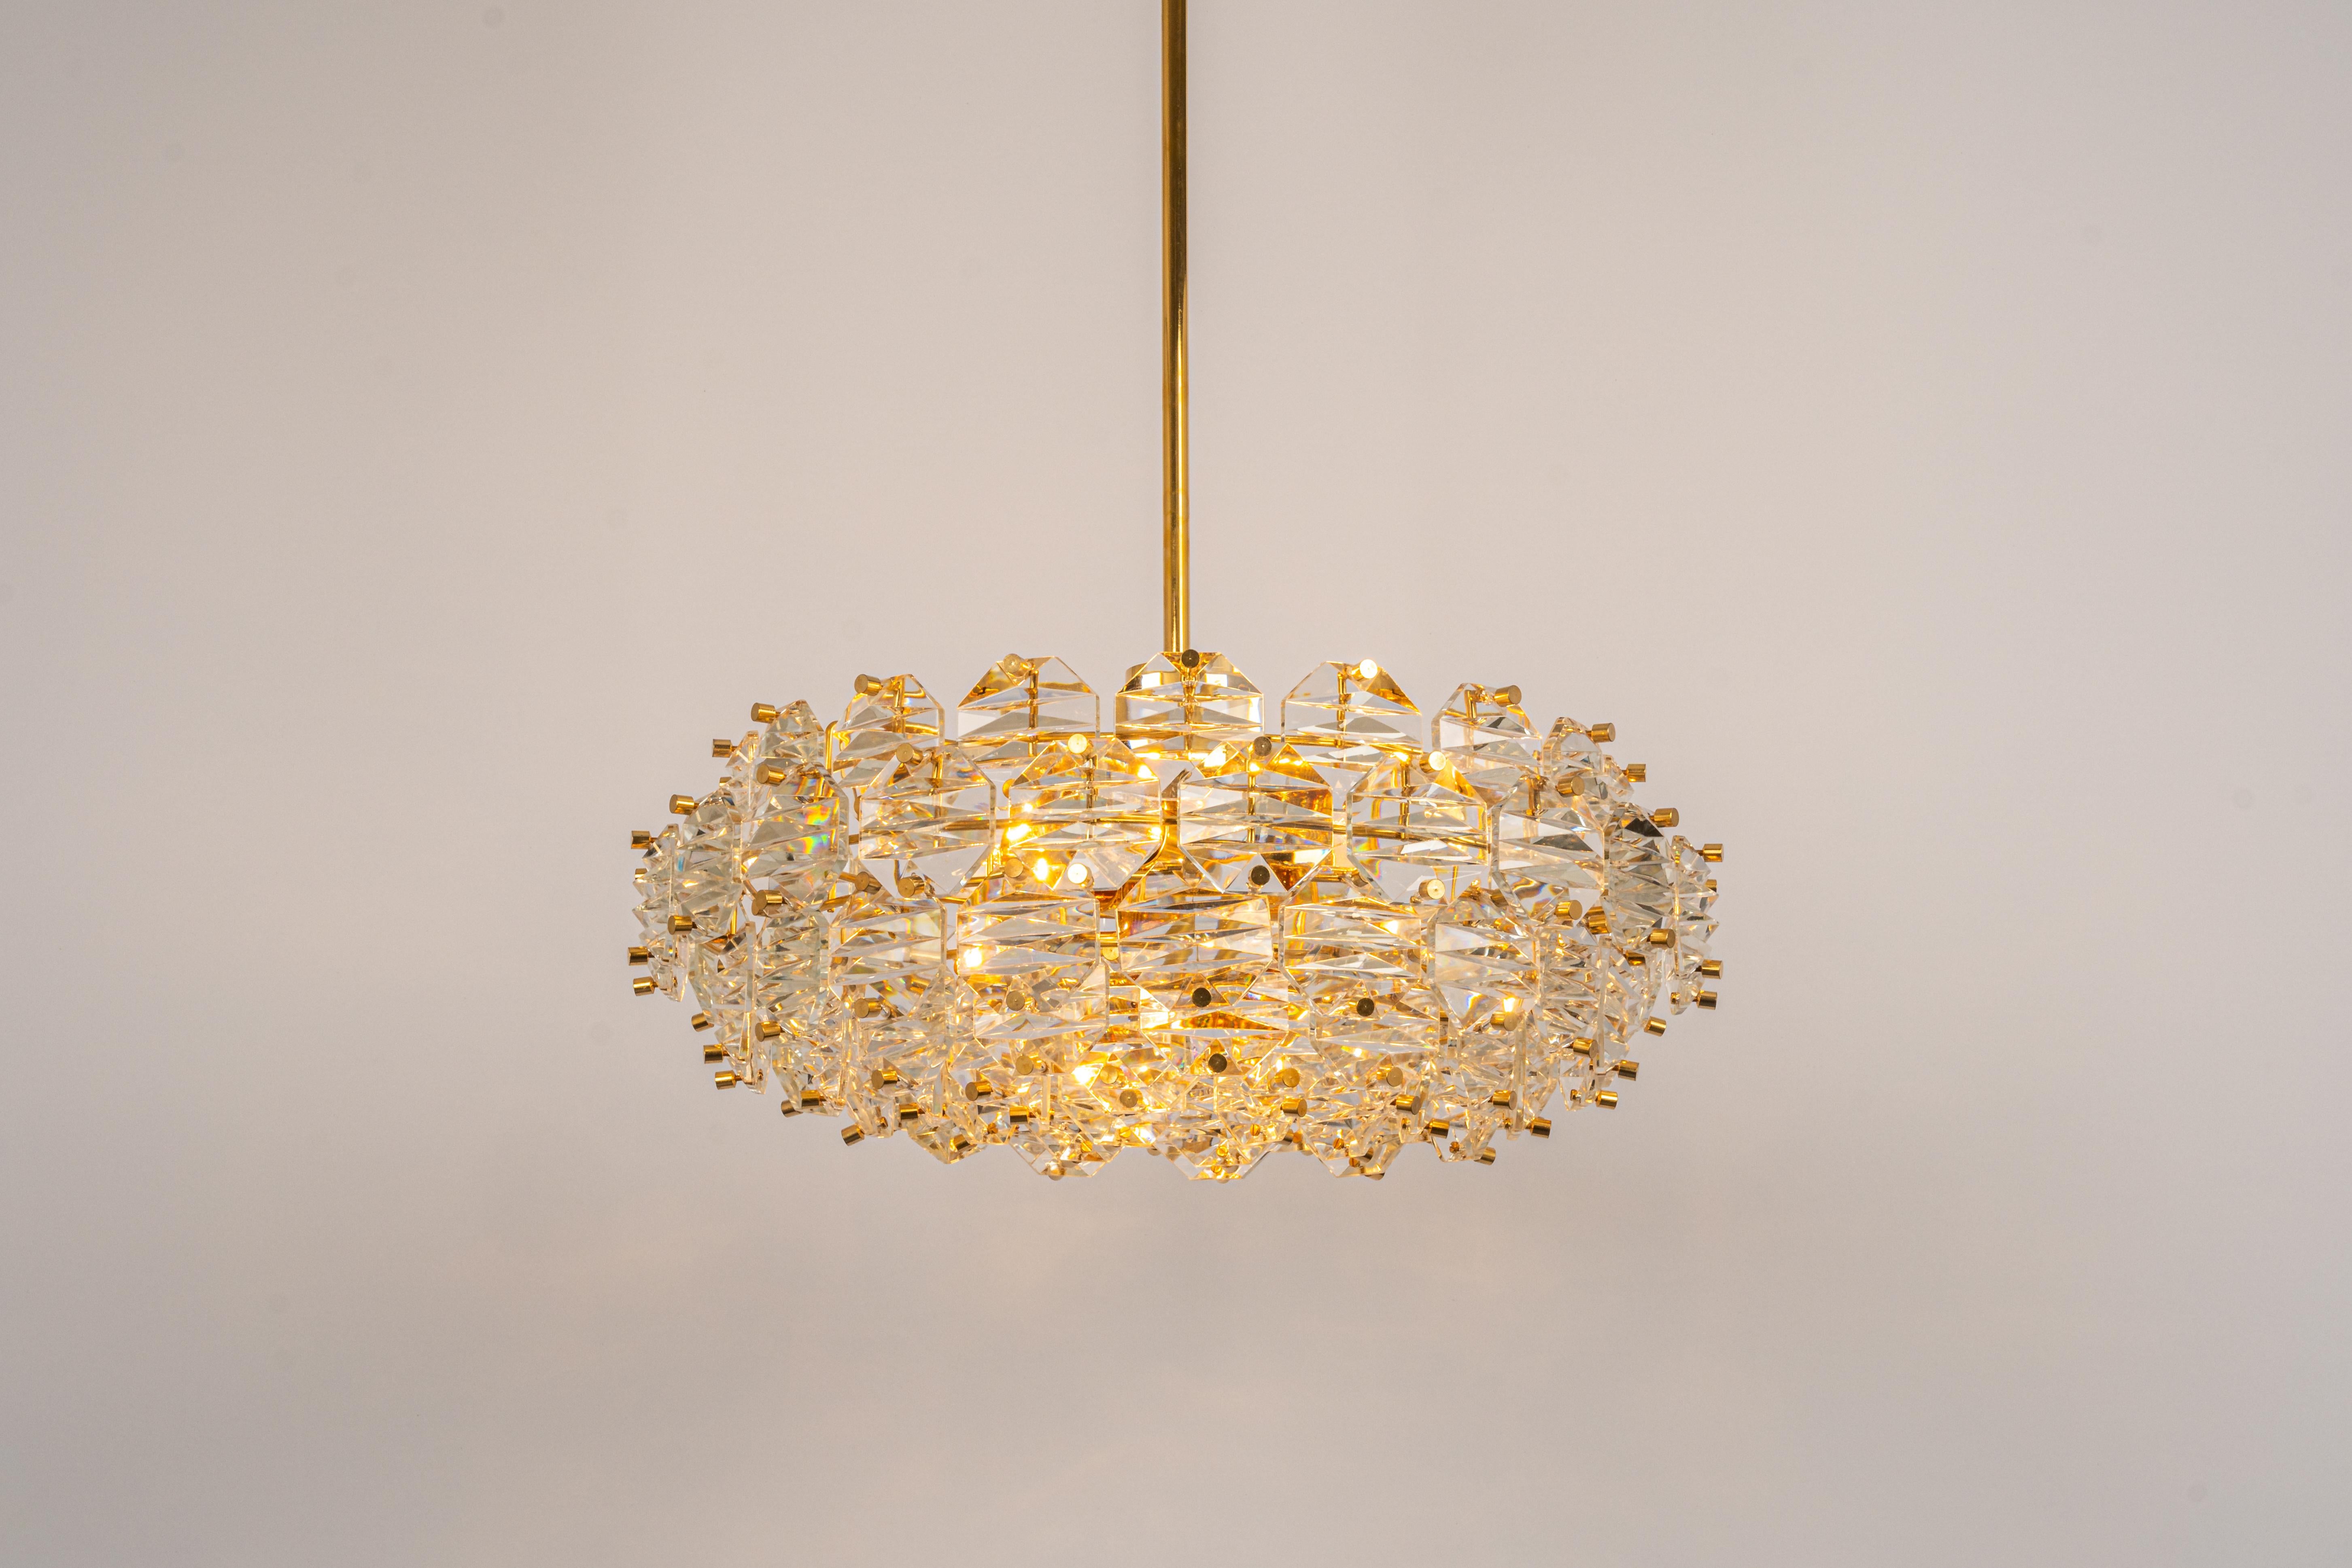 Stunning Chandelier, Brass and Crystal Glass by Kinkeldey, Germany, 1970s For Sale 1